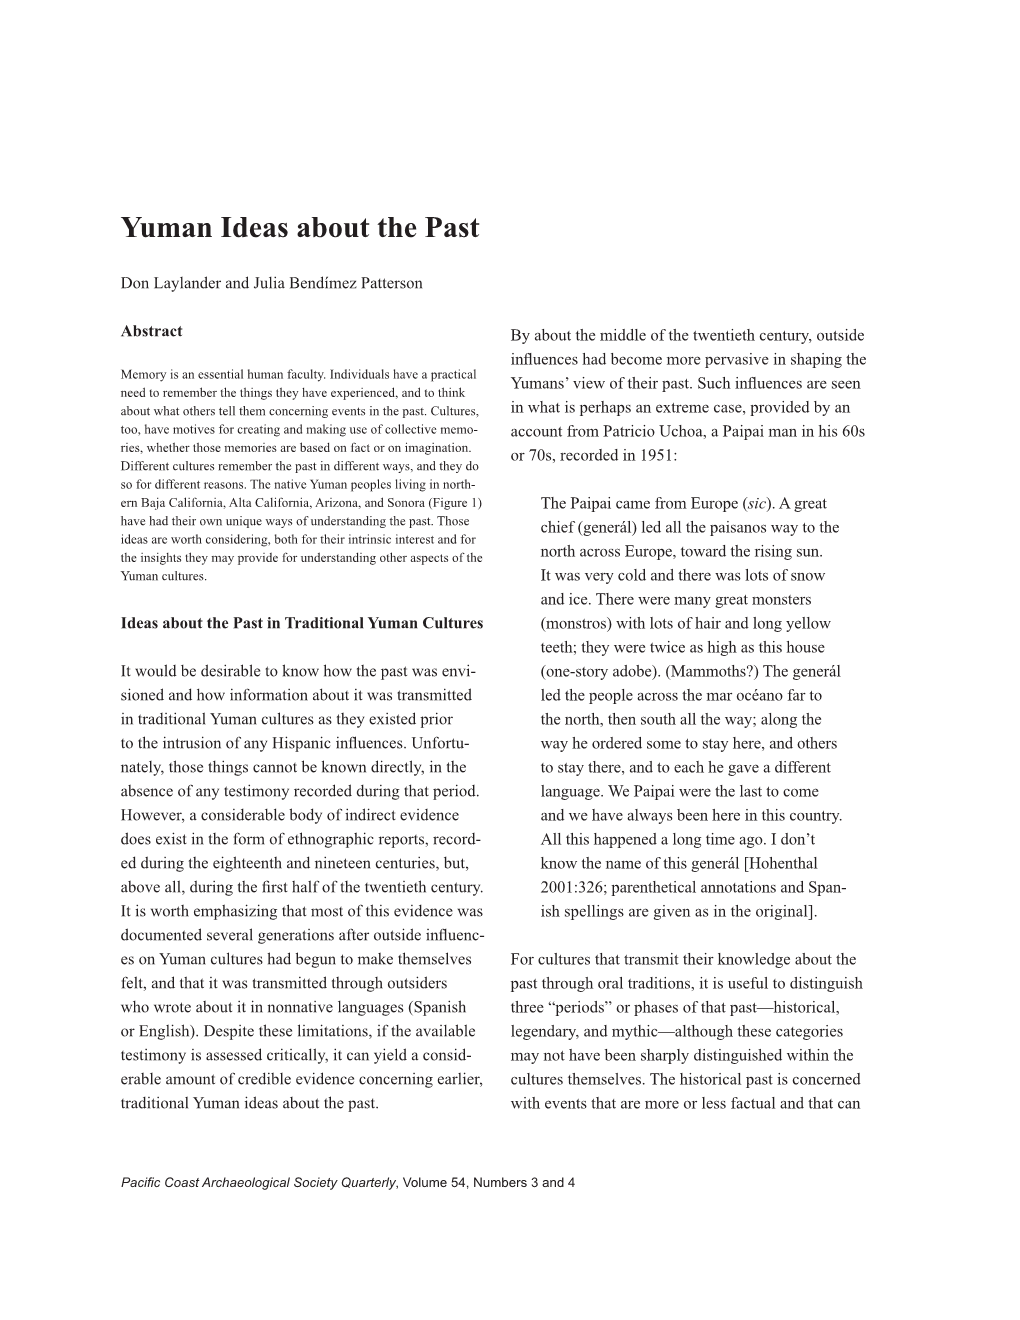 Yuman Ideas About the Past